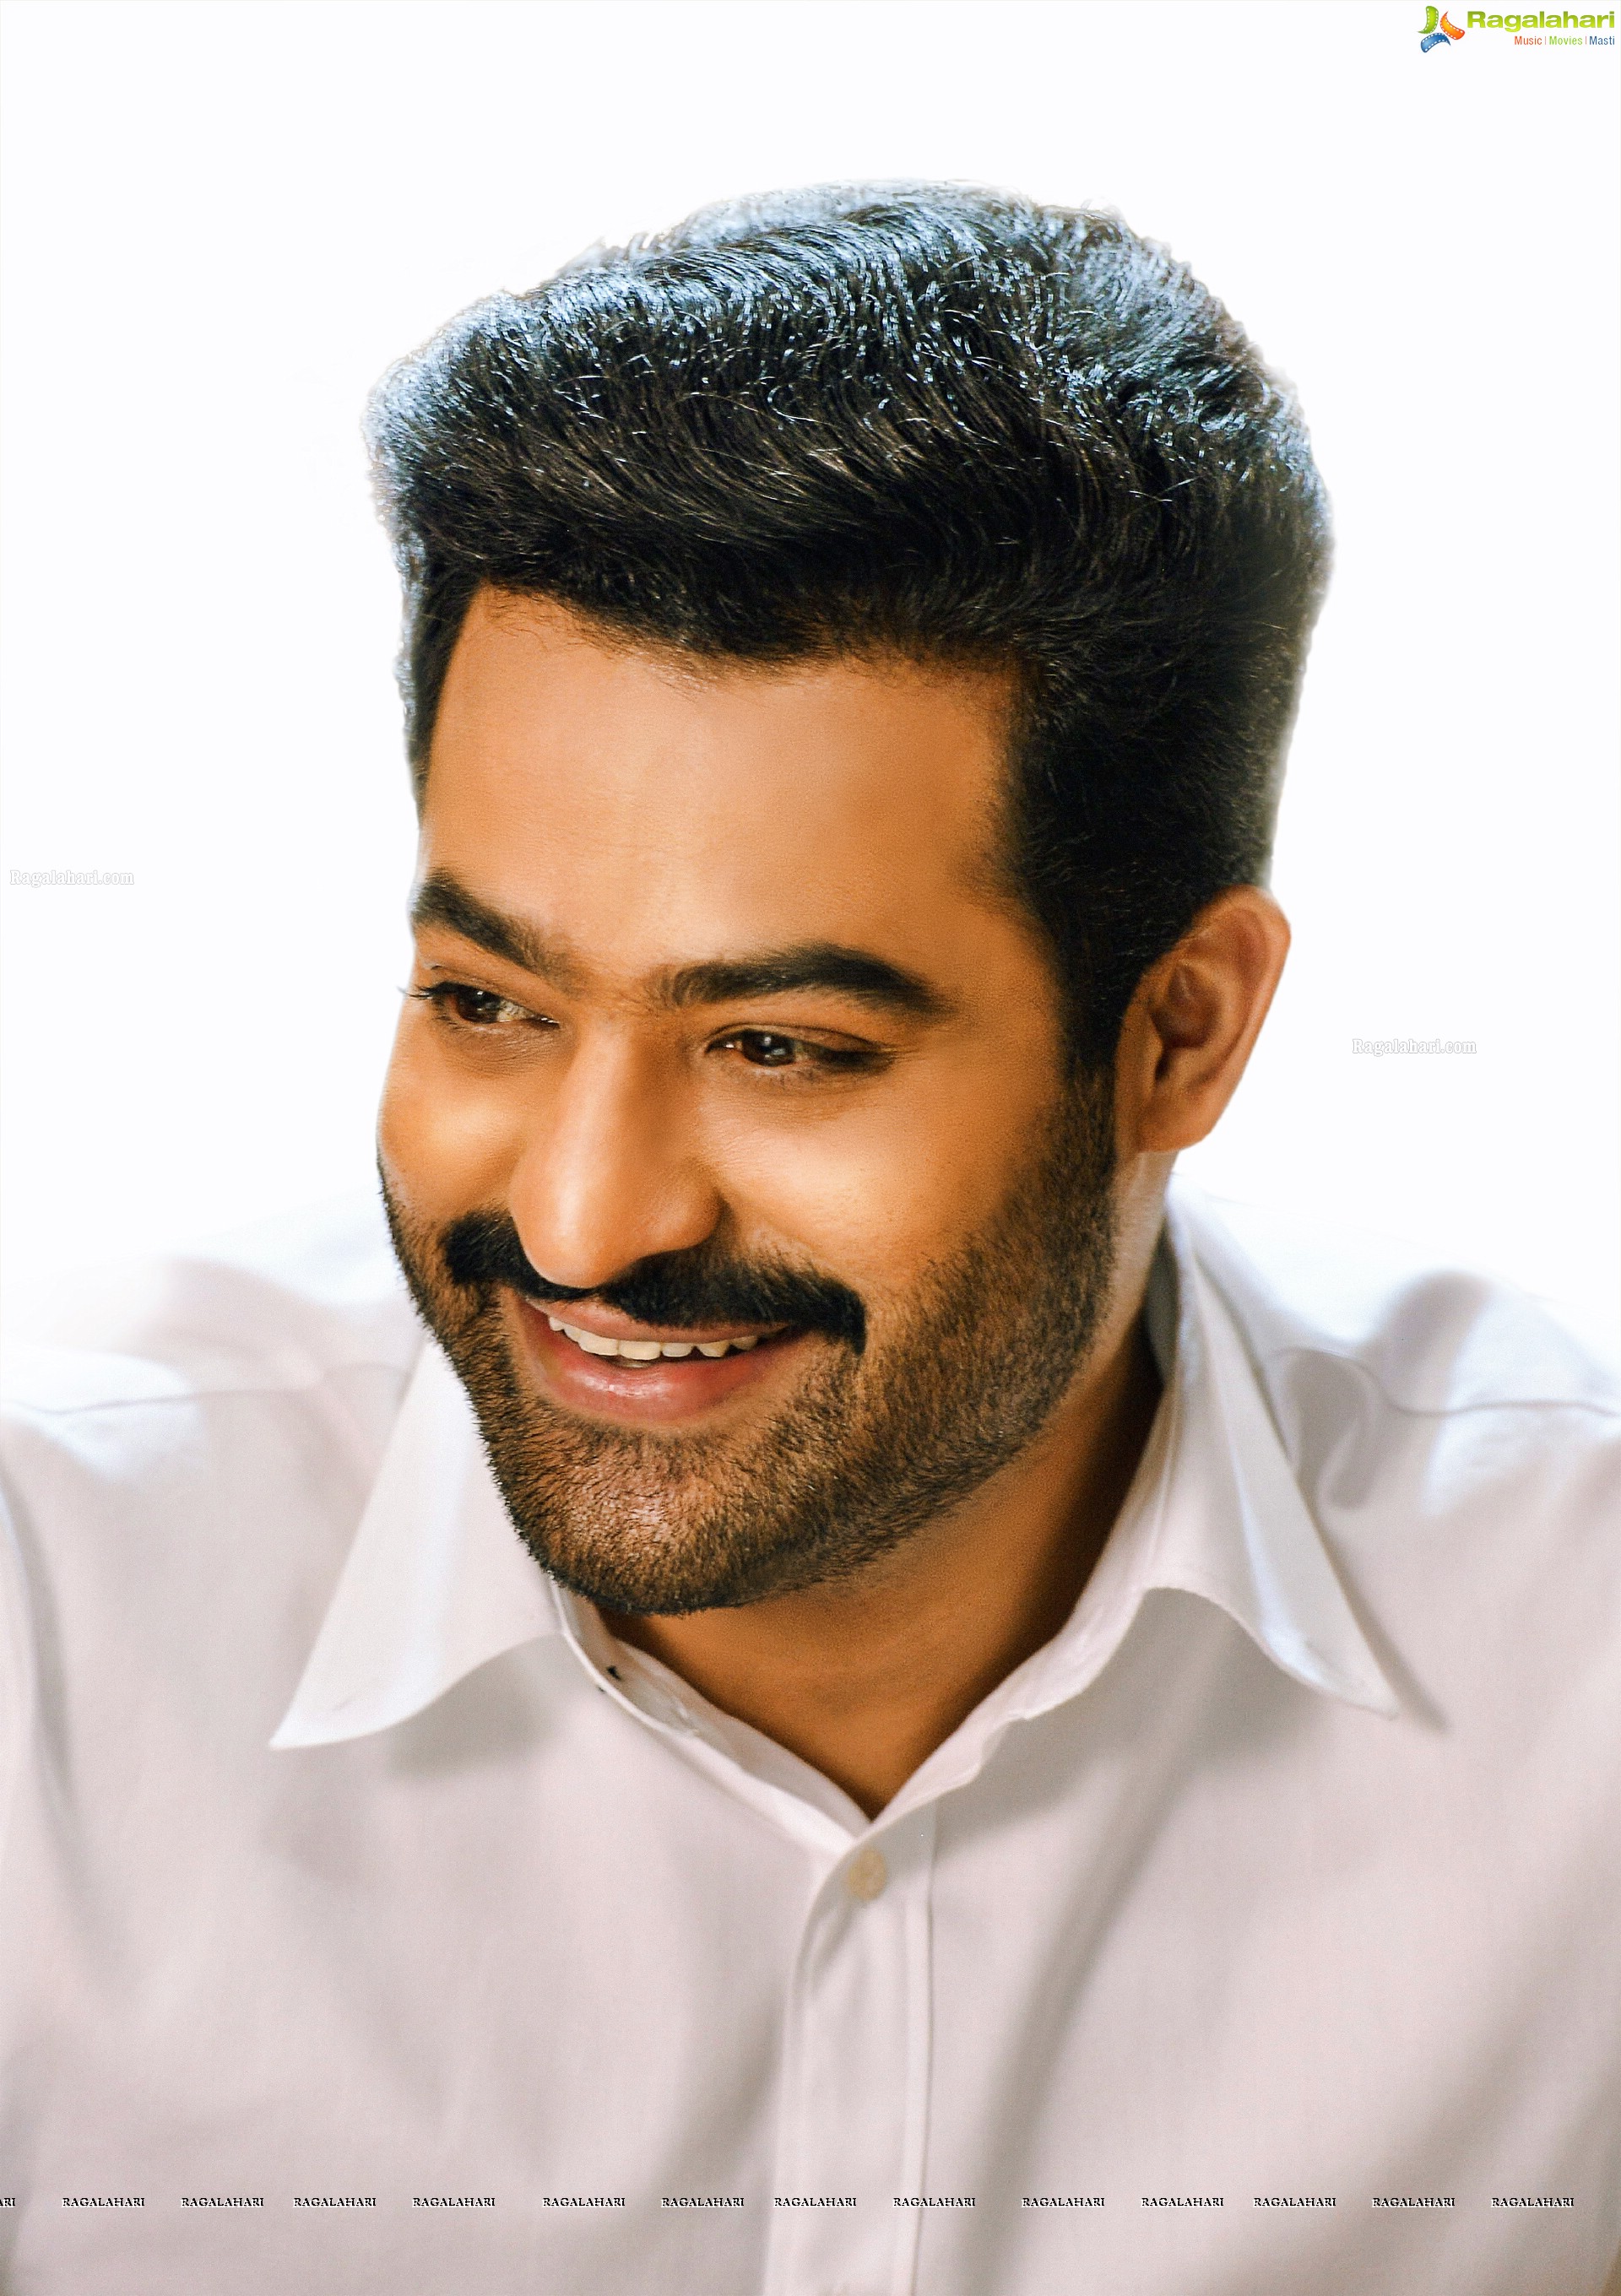 NTR impresses with first look of Lava in JLK